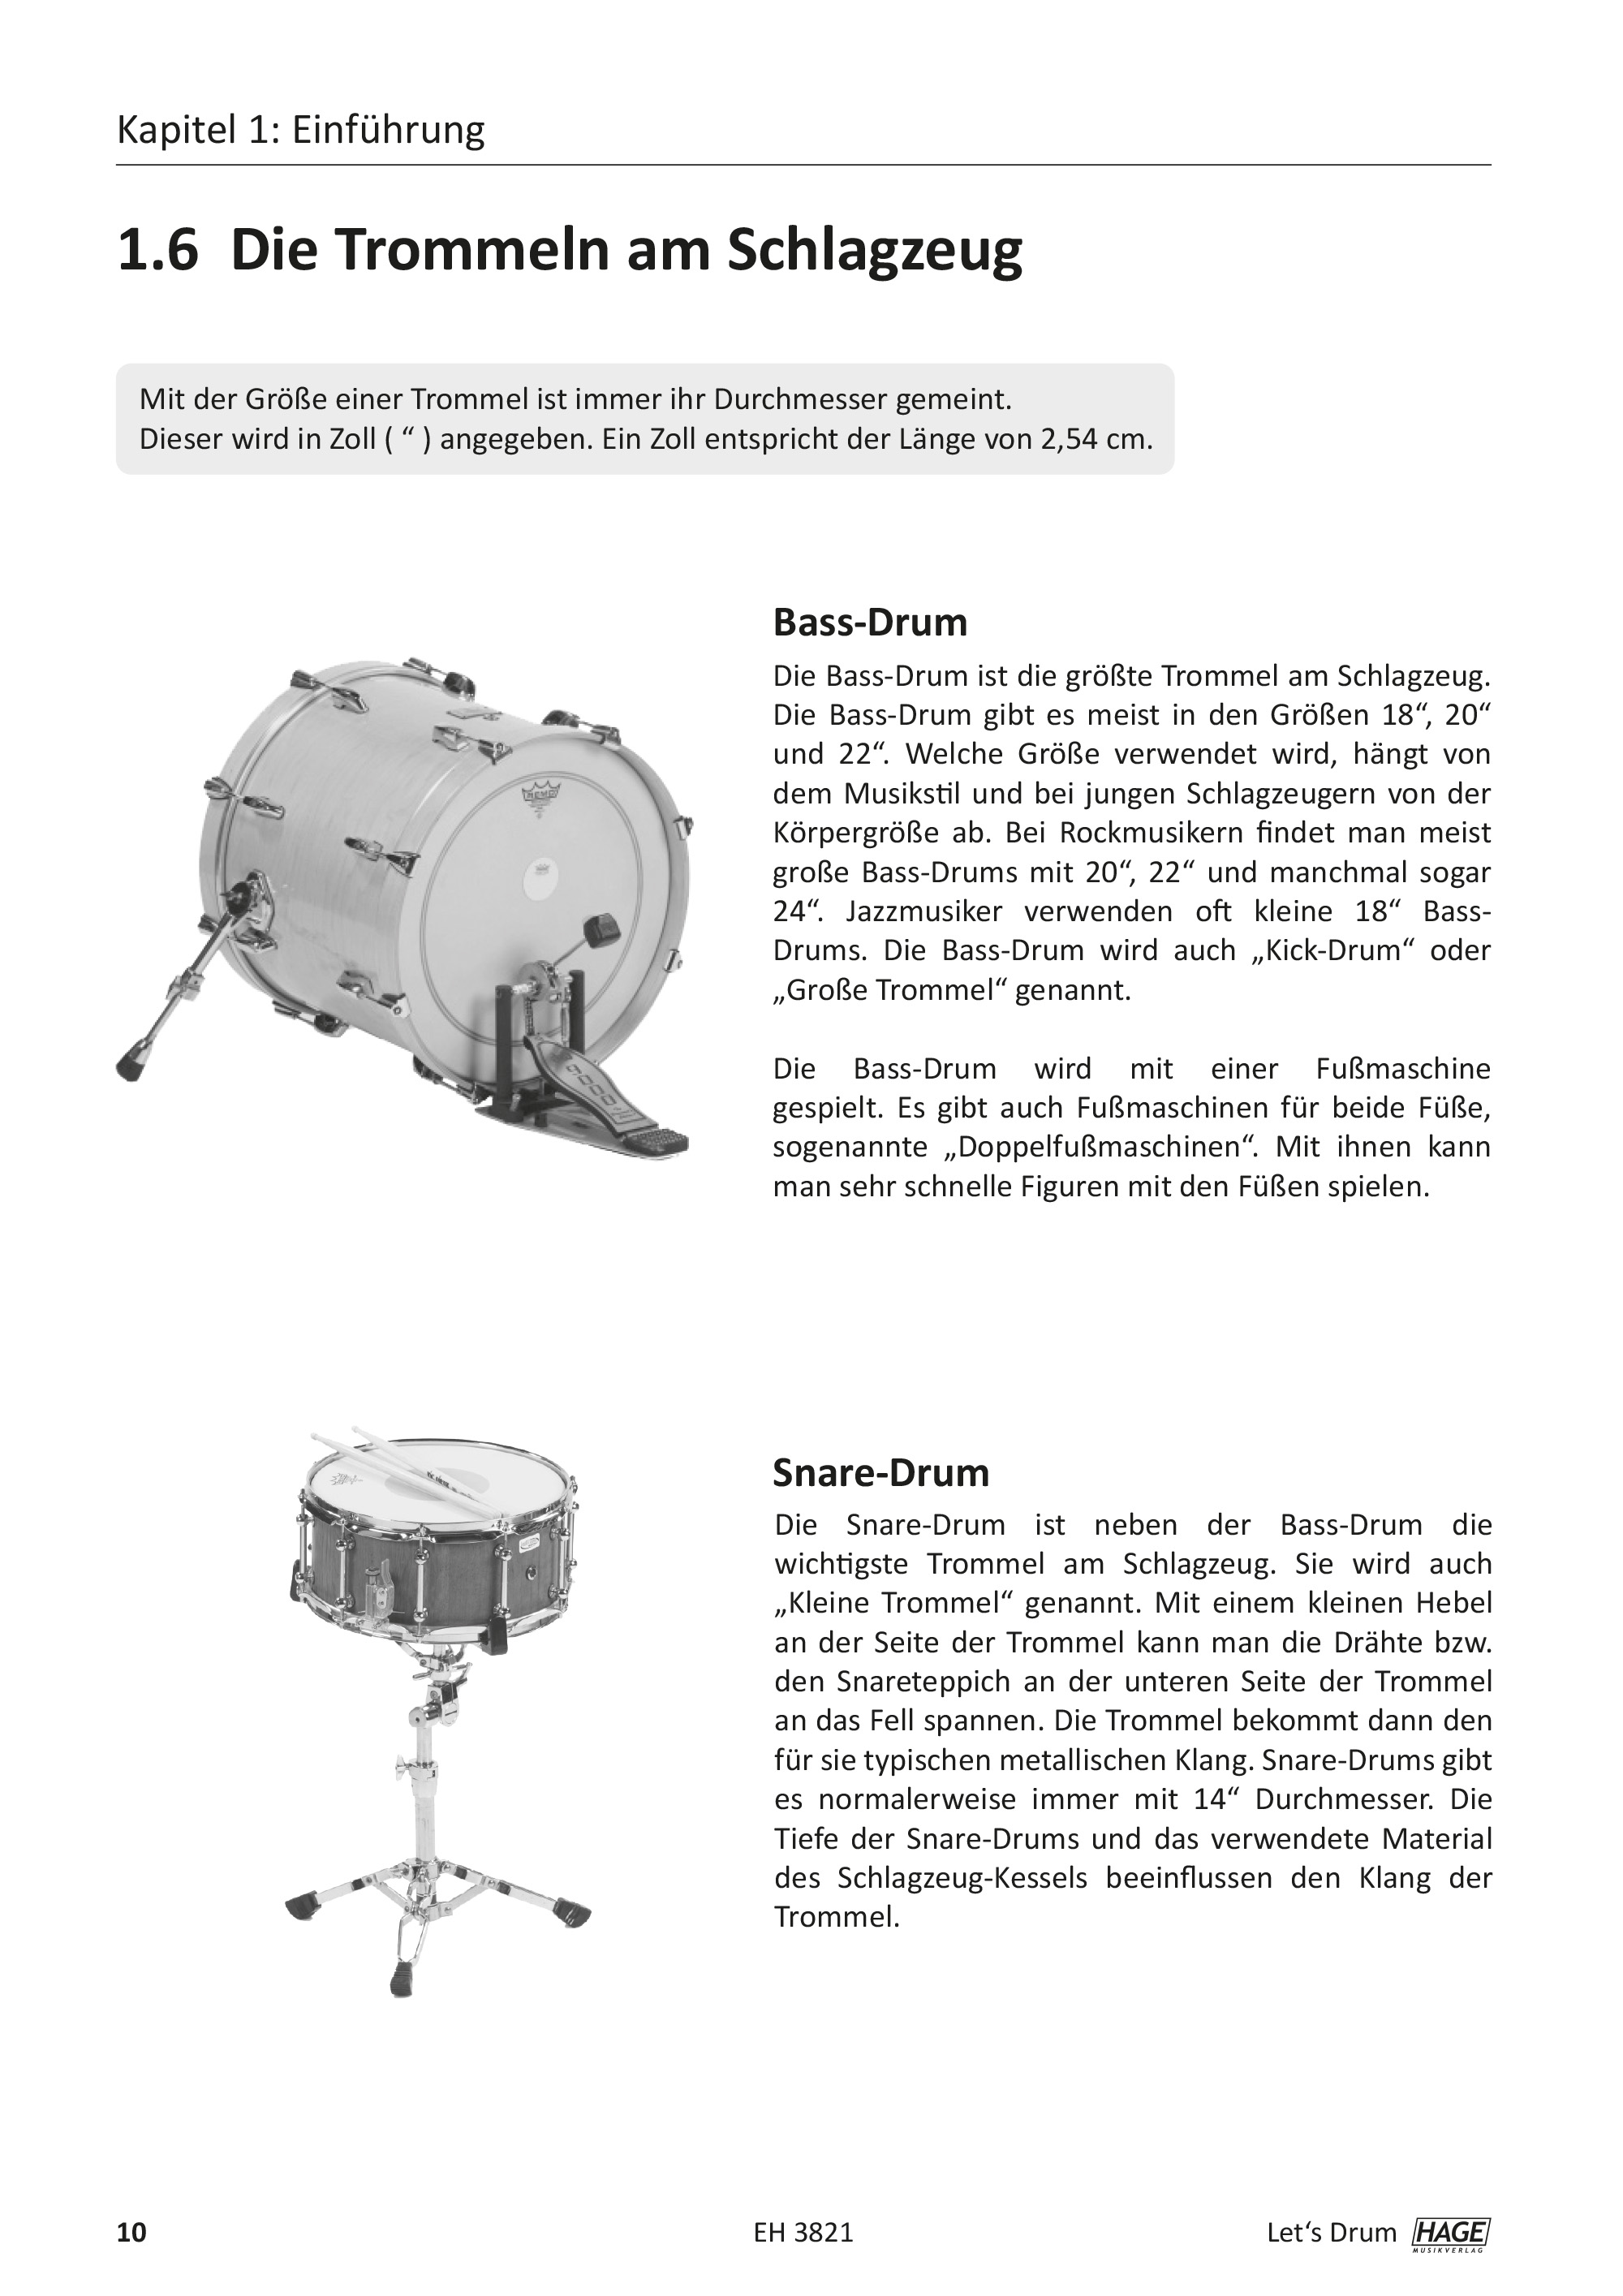 Let's Drum (with QR-Codes) Pages 8